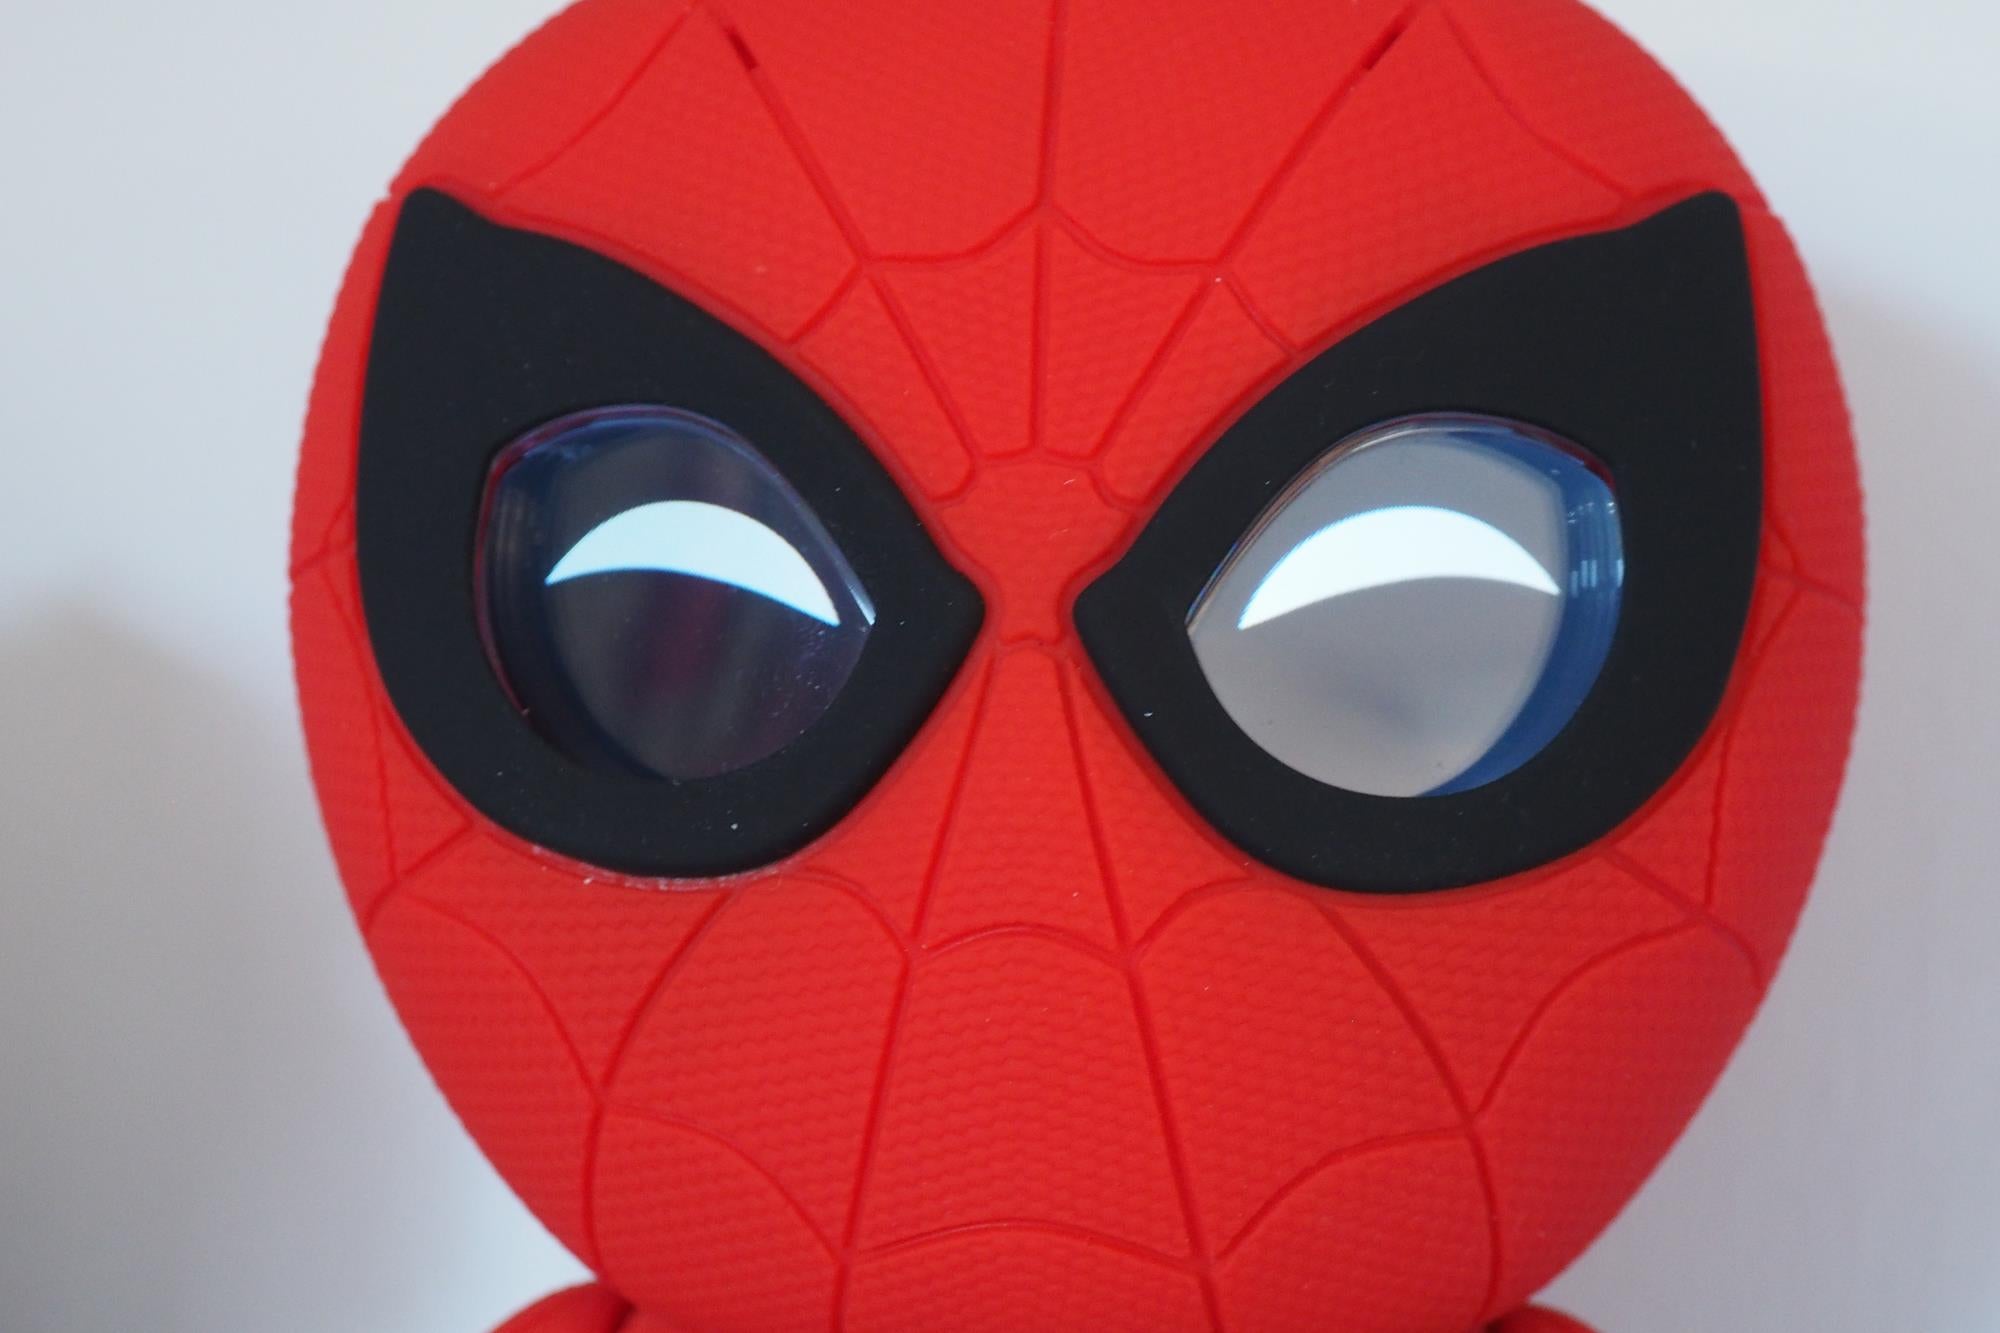 Close-up of Sphero Spider-Man interactive toy's face